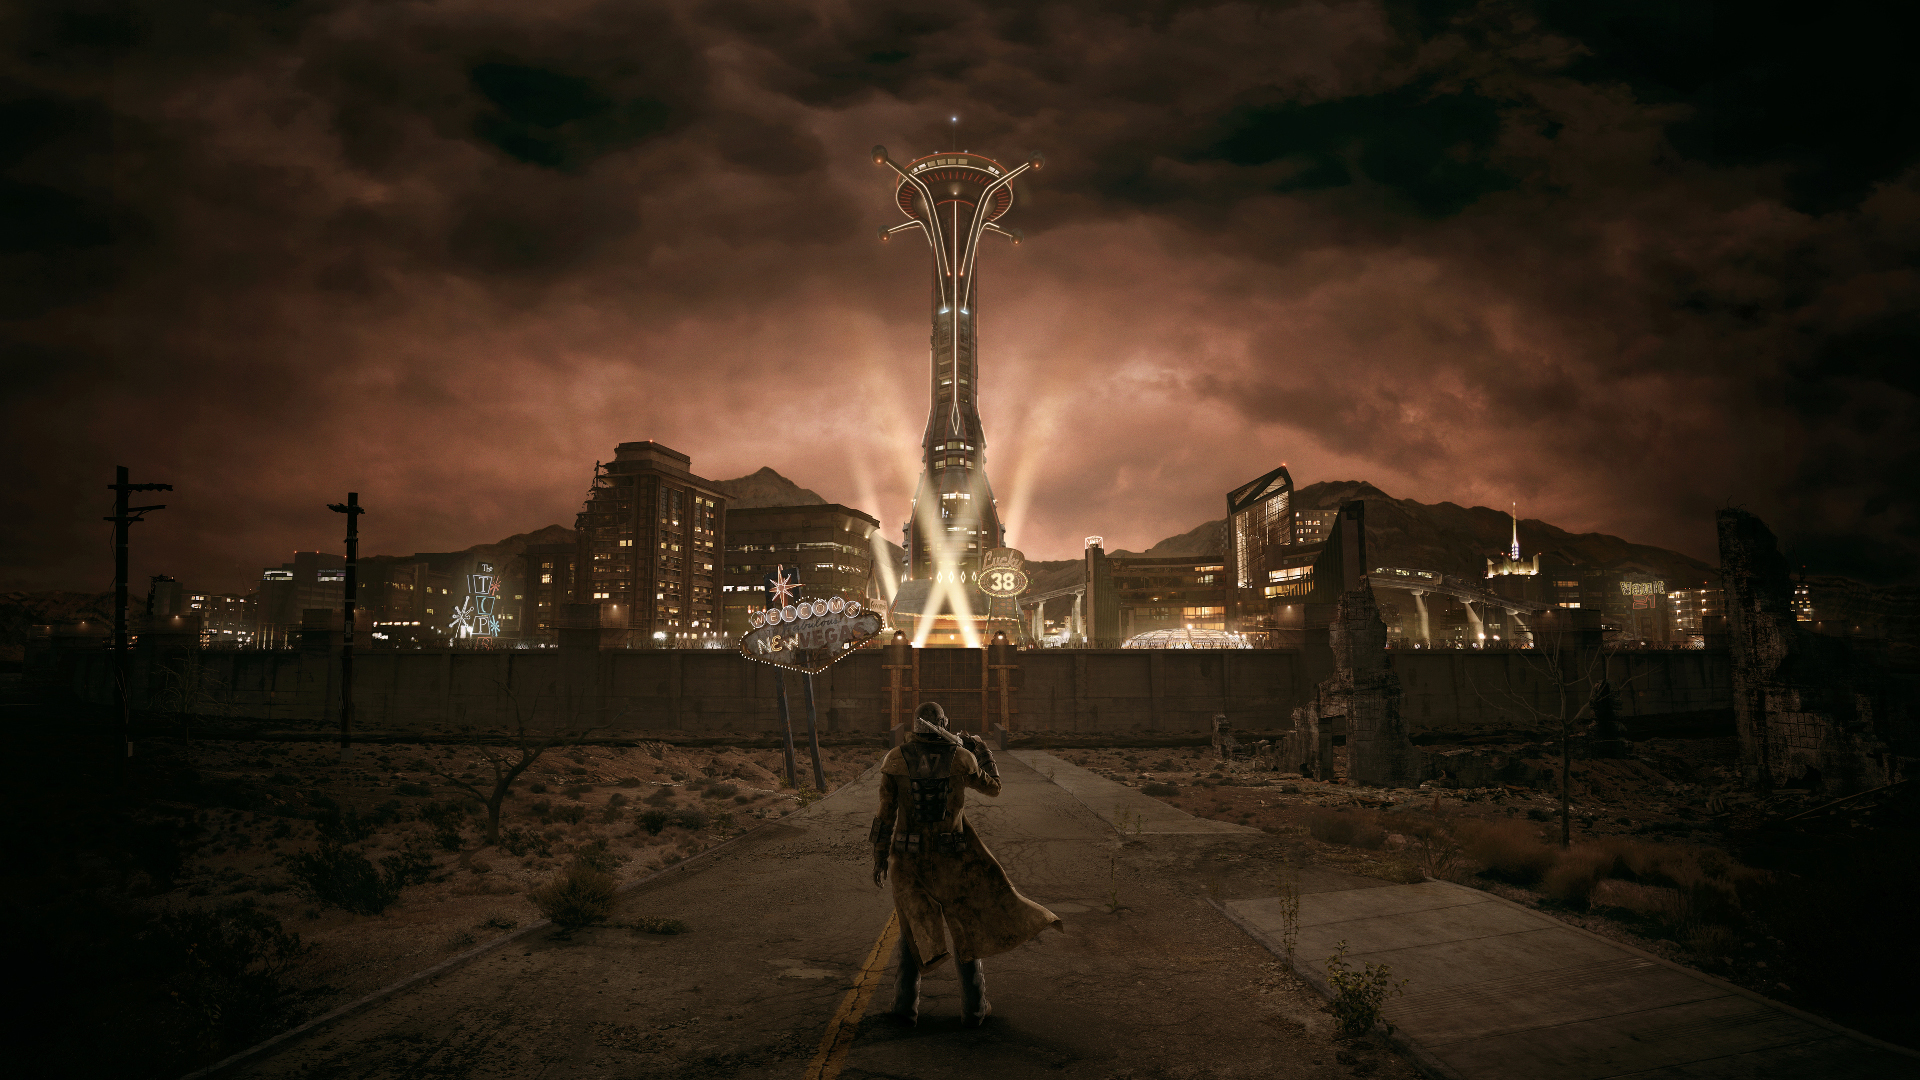 fallout new vegas wallpaper hd,sky,darkness,night,pc game,digital compositing